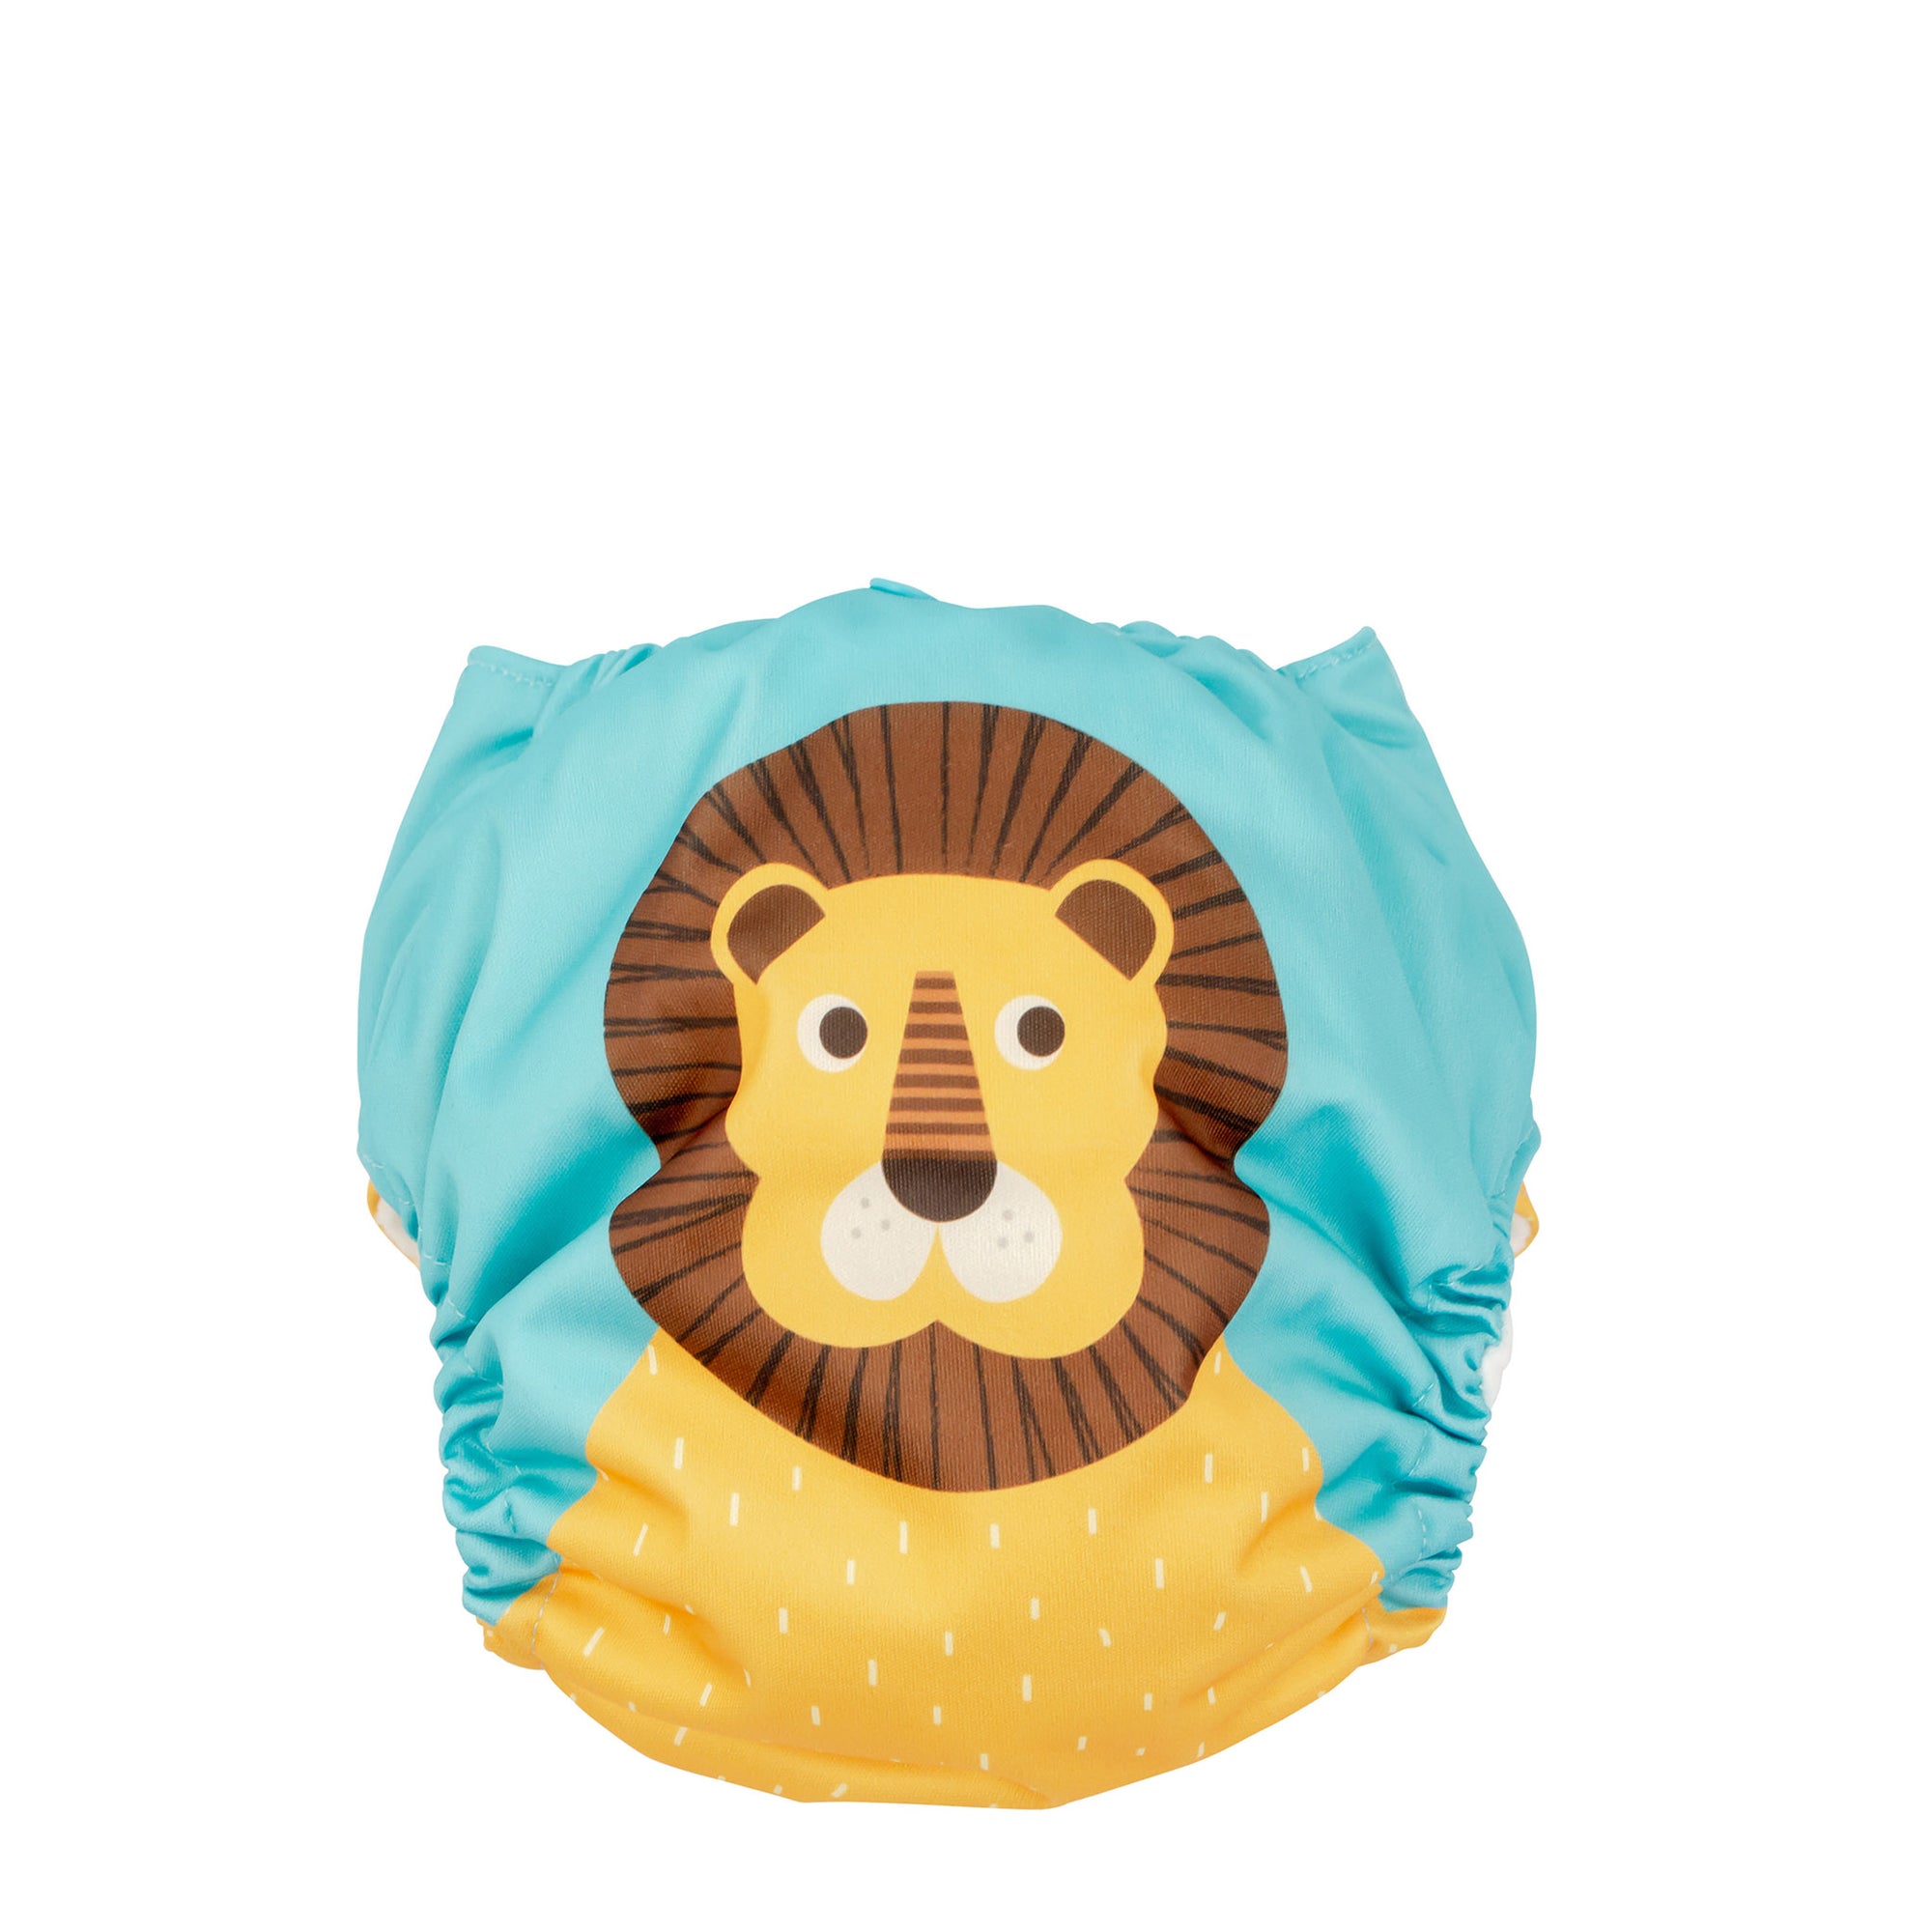 Baby/Toddler Reusable Cloth Pocket Diaper (+2 Inserts) - Leo the Lion